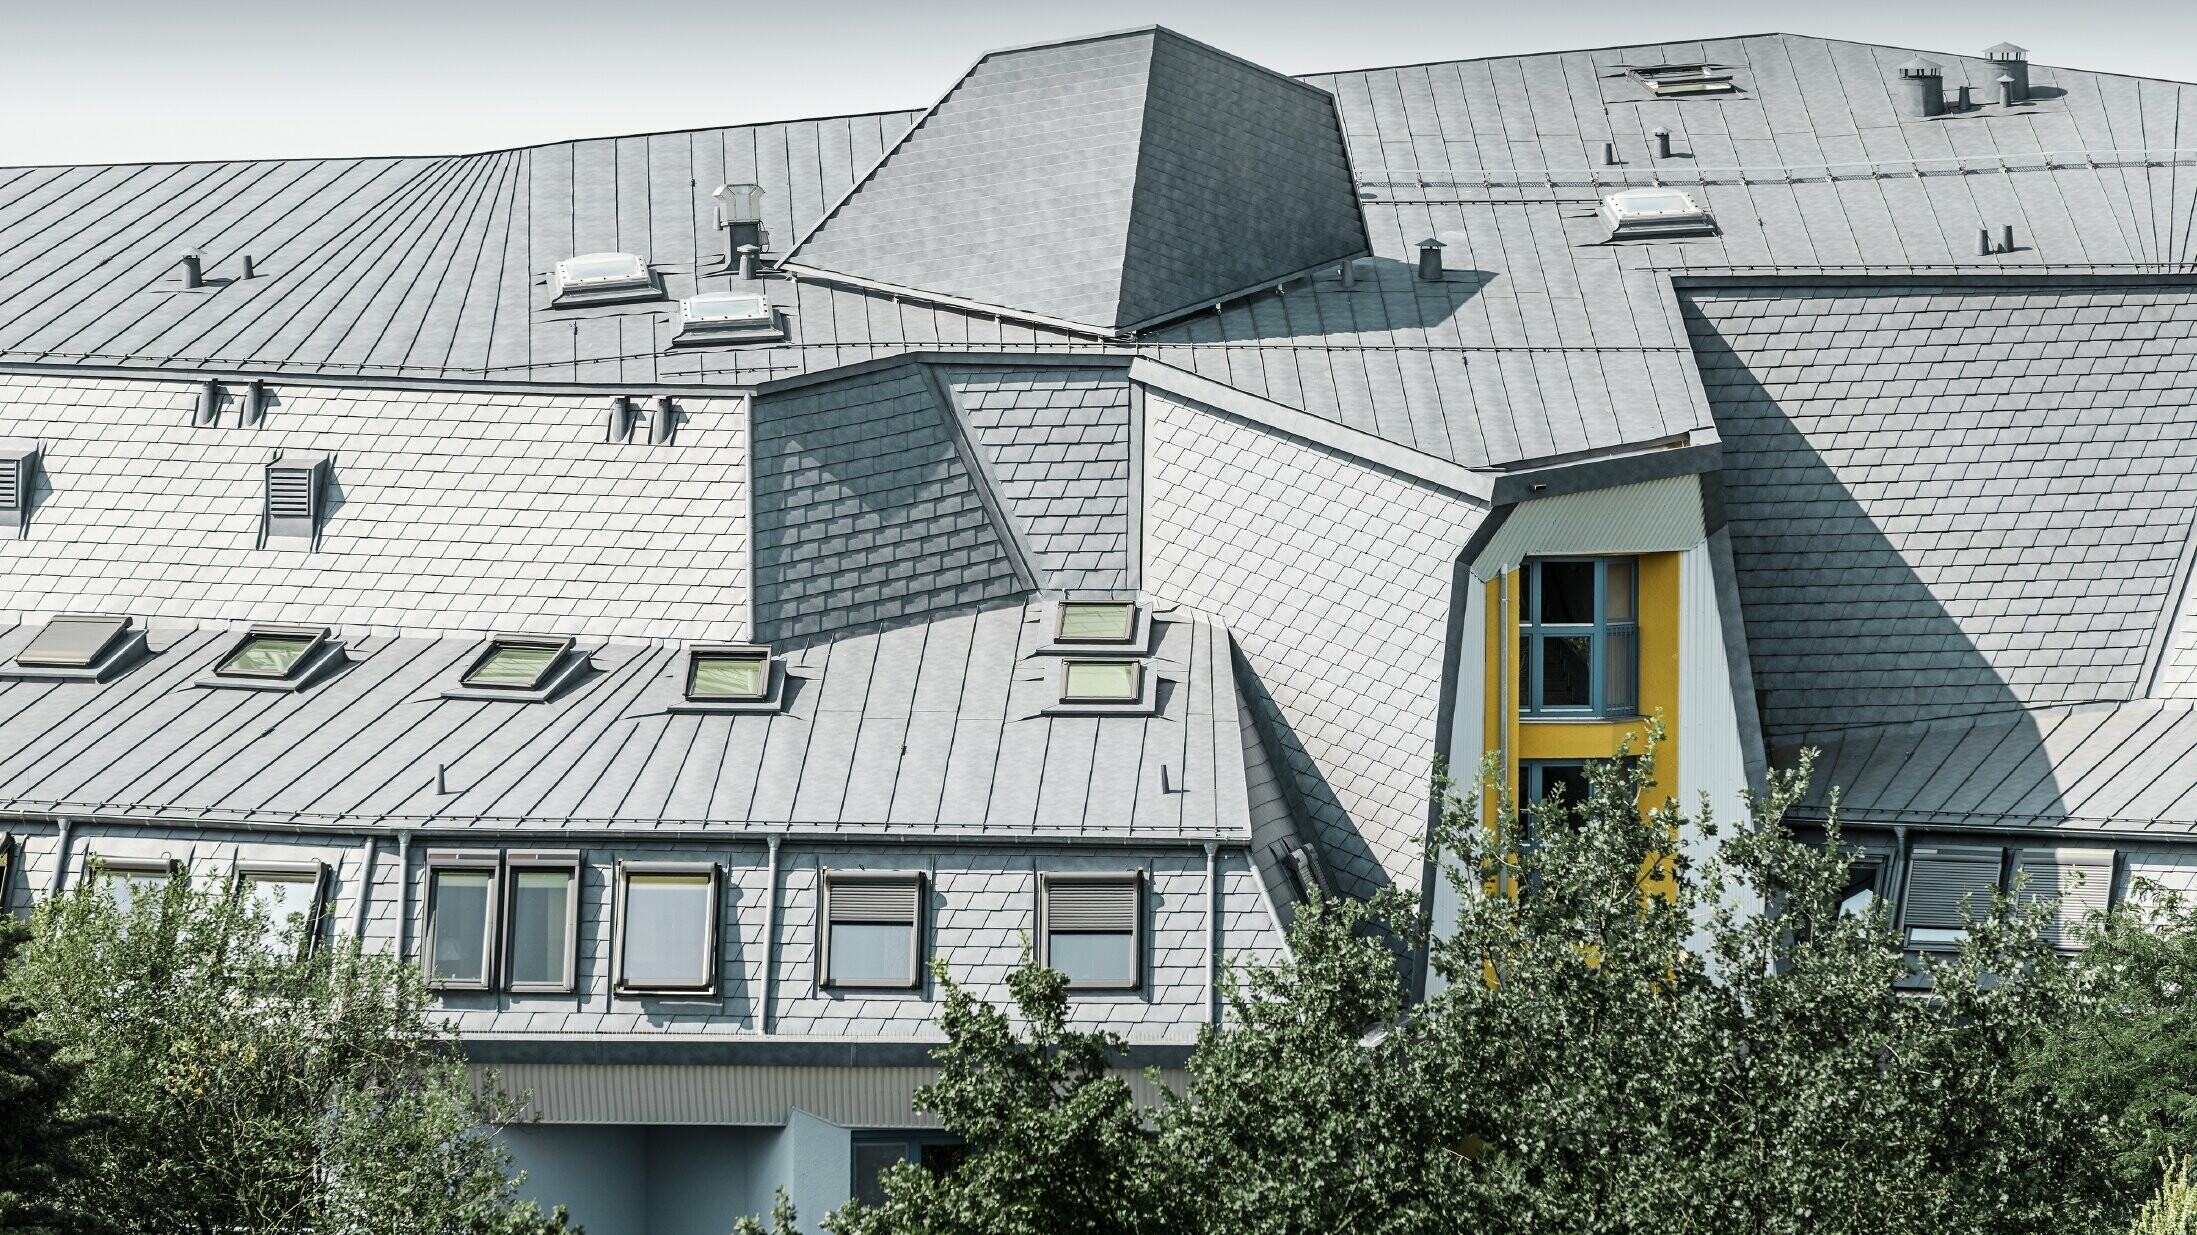 renovated roof with various roof windows, detail, aluminium roof made of Prefalz and PREFA shingles